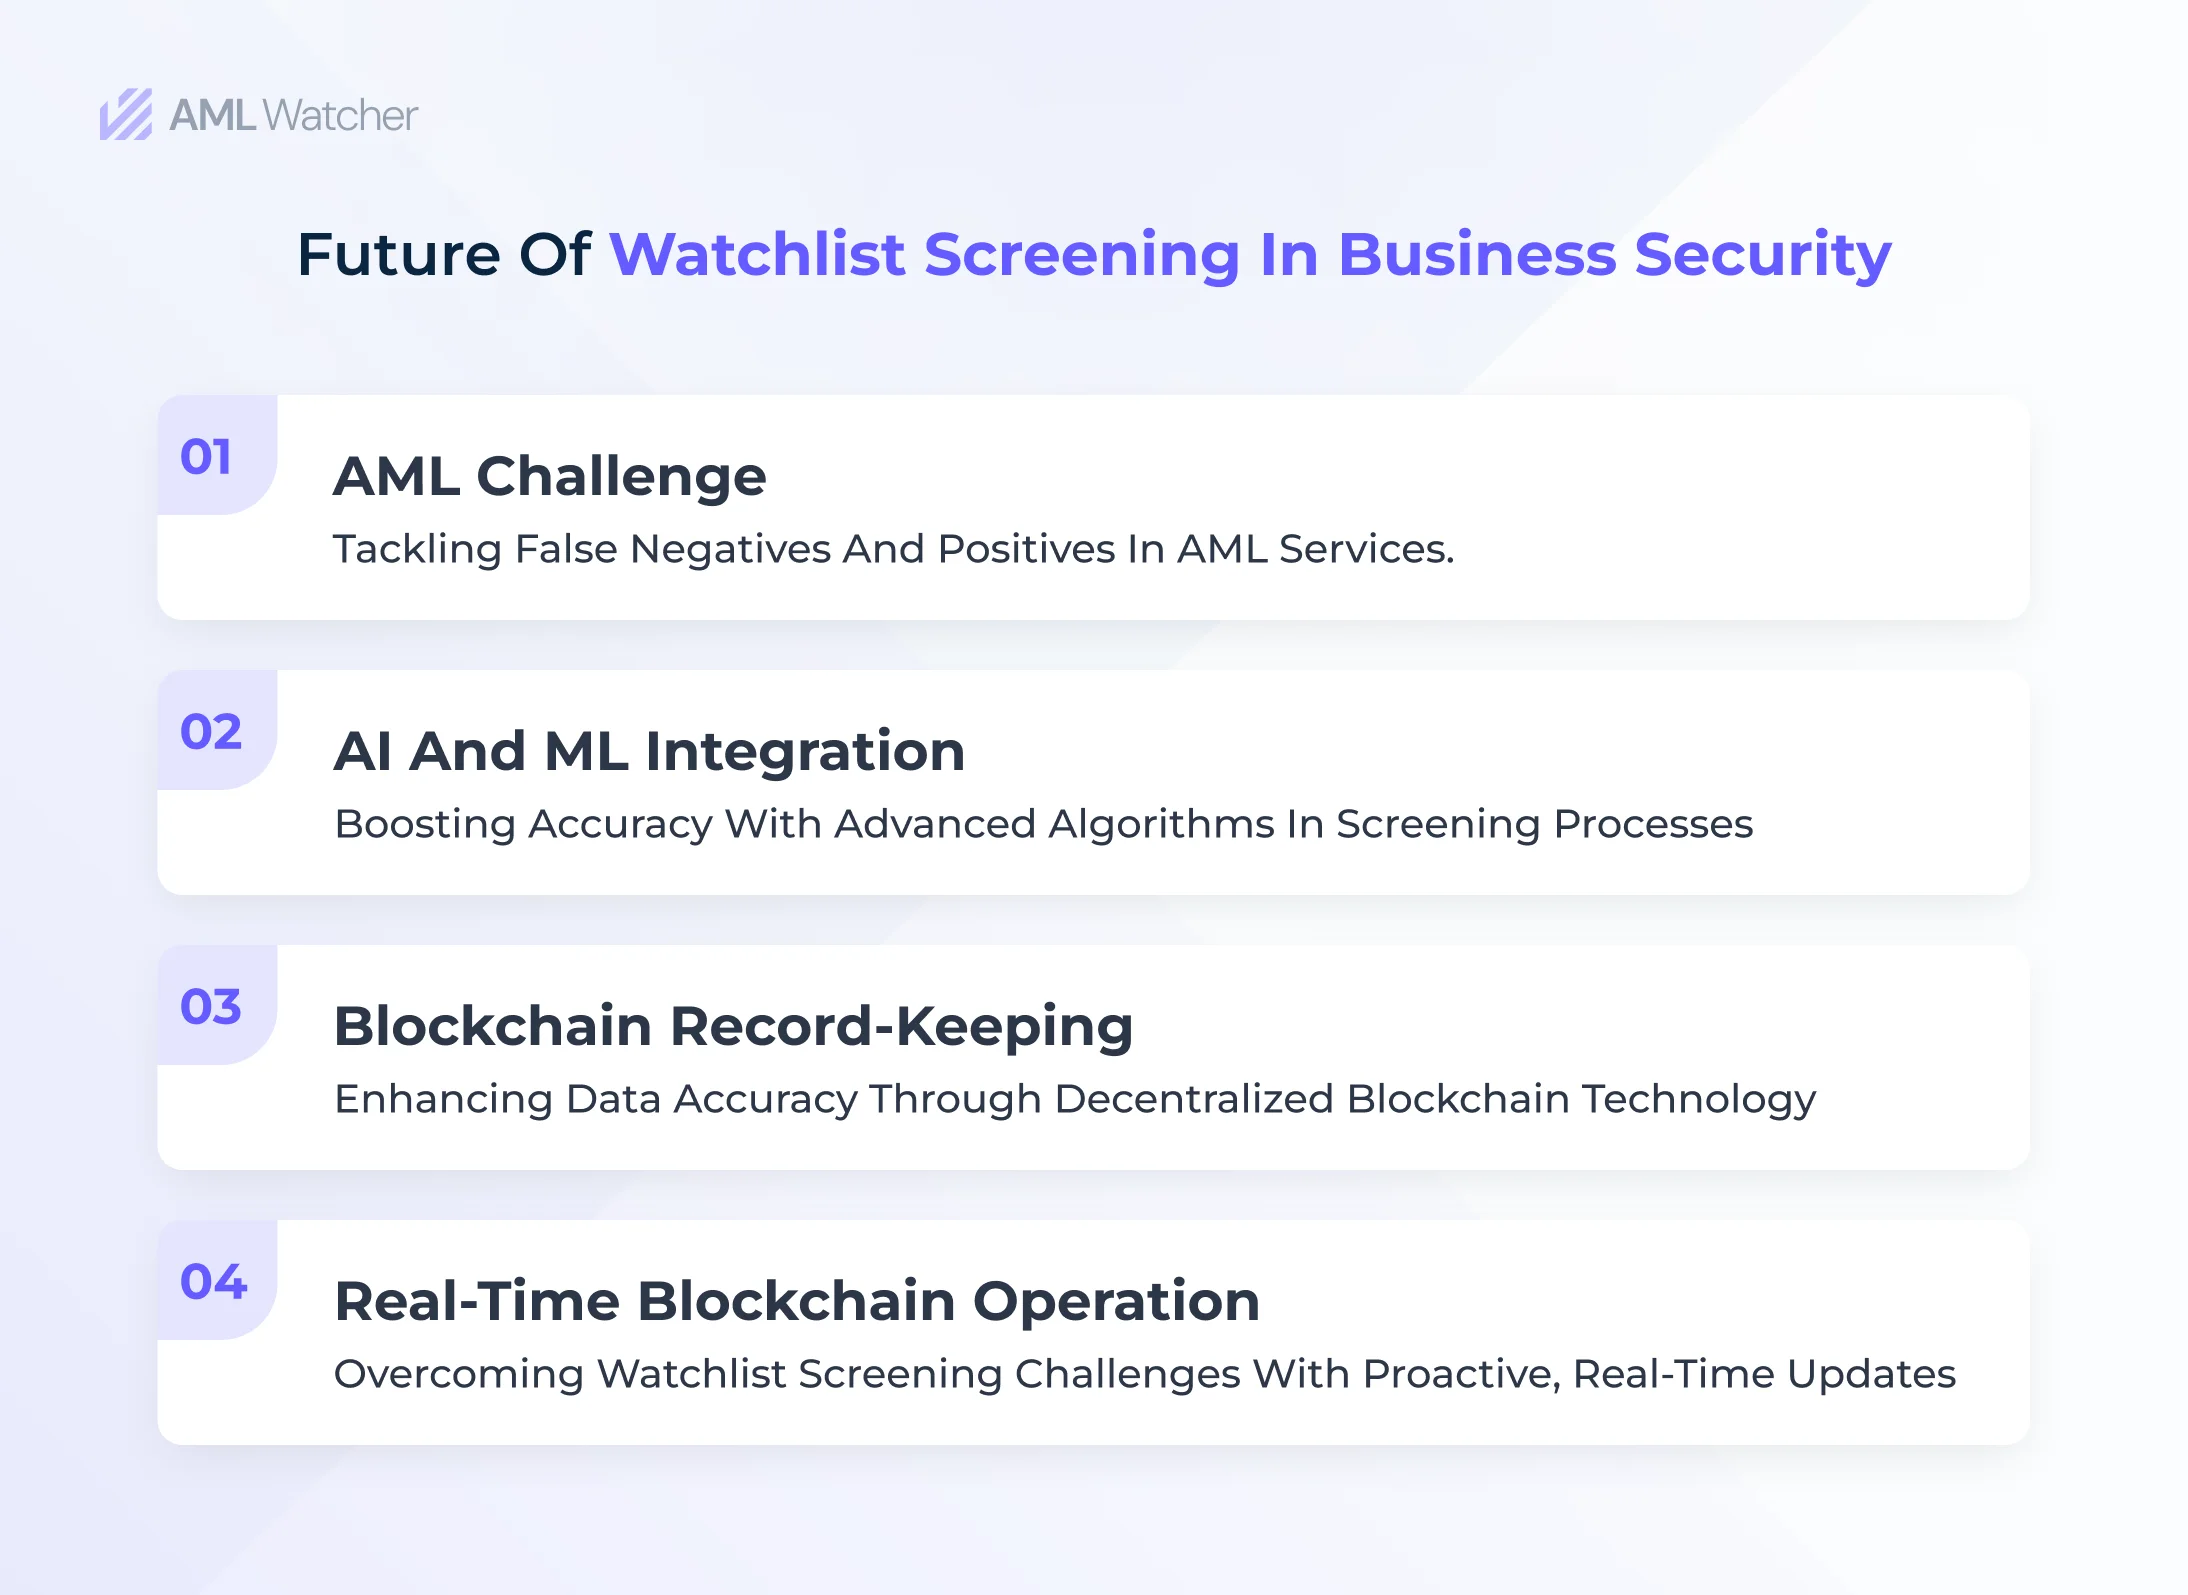 It's crucial to know the future of watchlist screening for organizations/companies to stay abreast of the changing technology. 